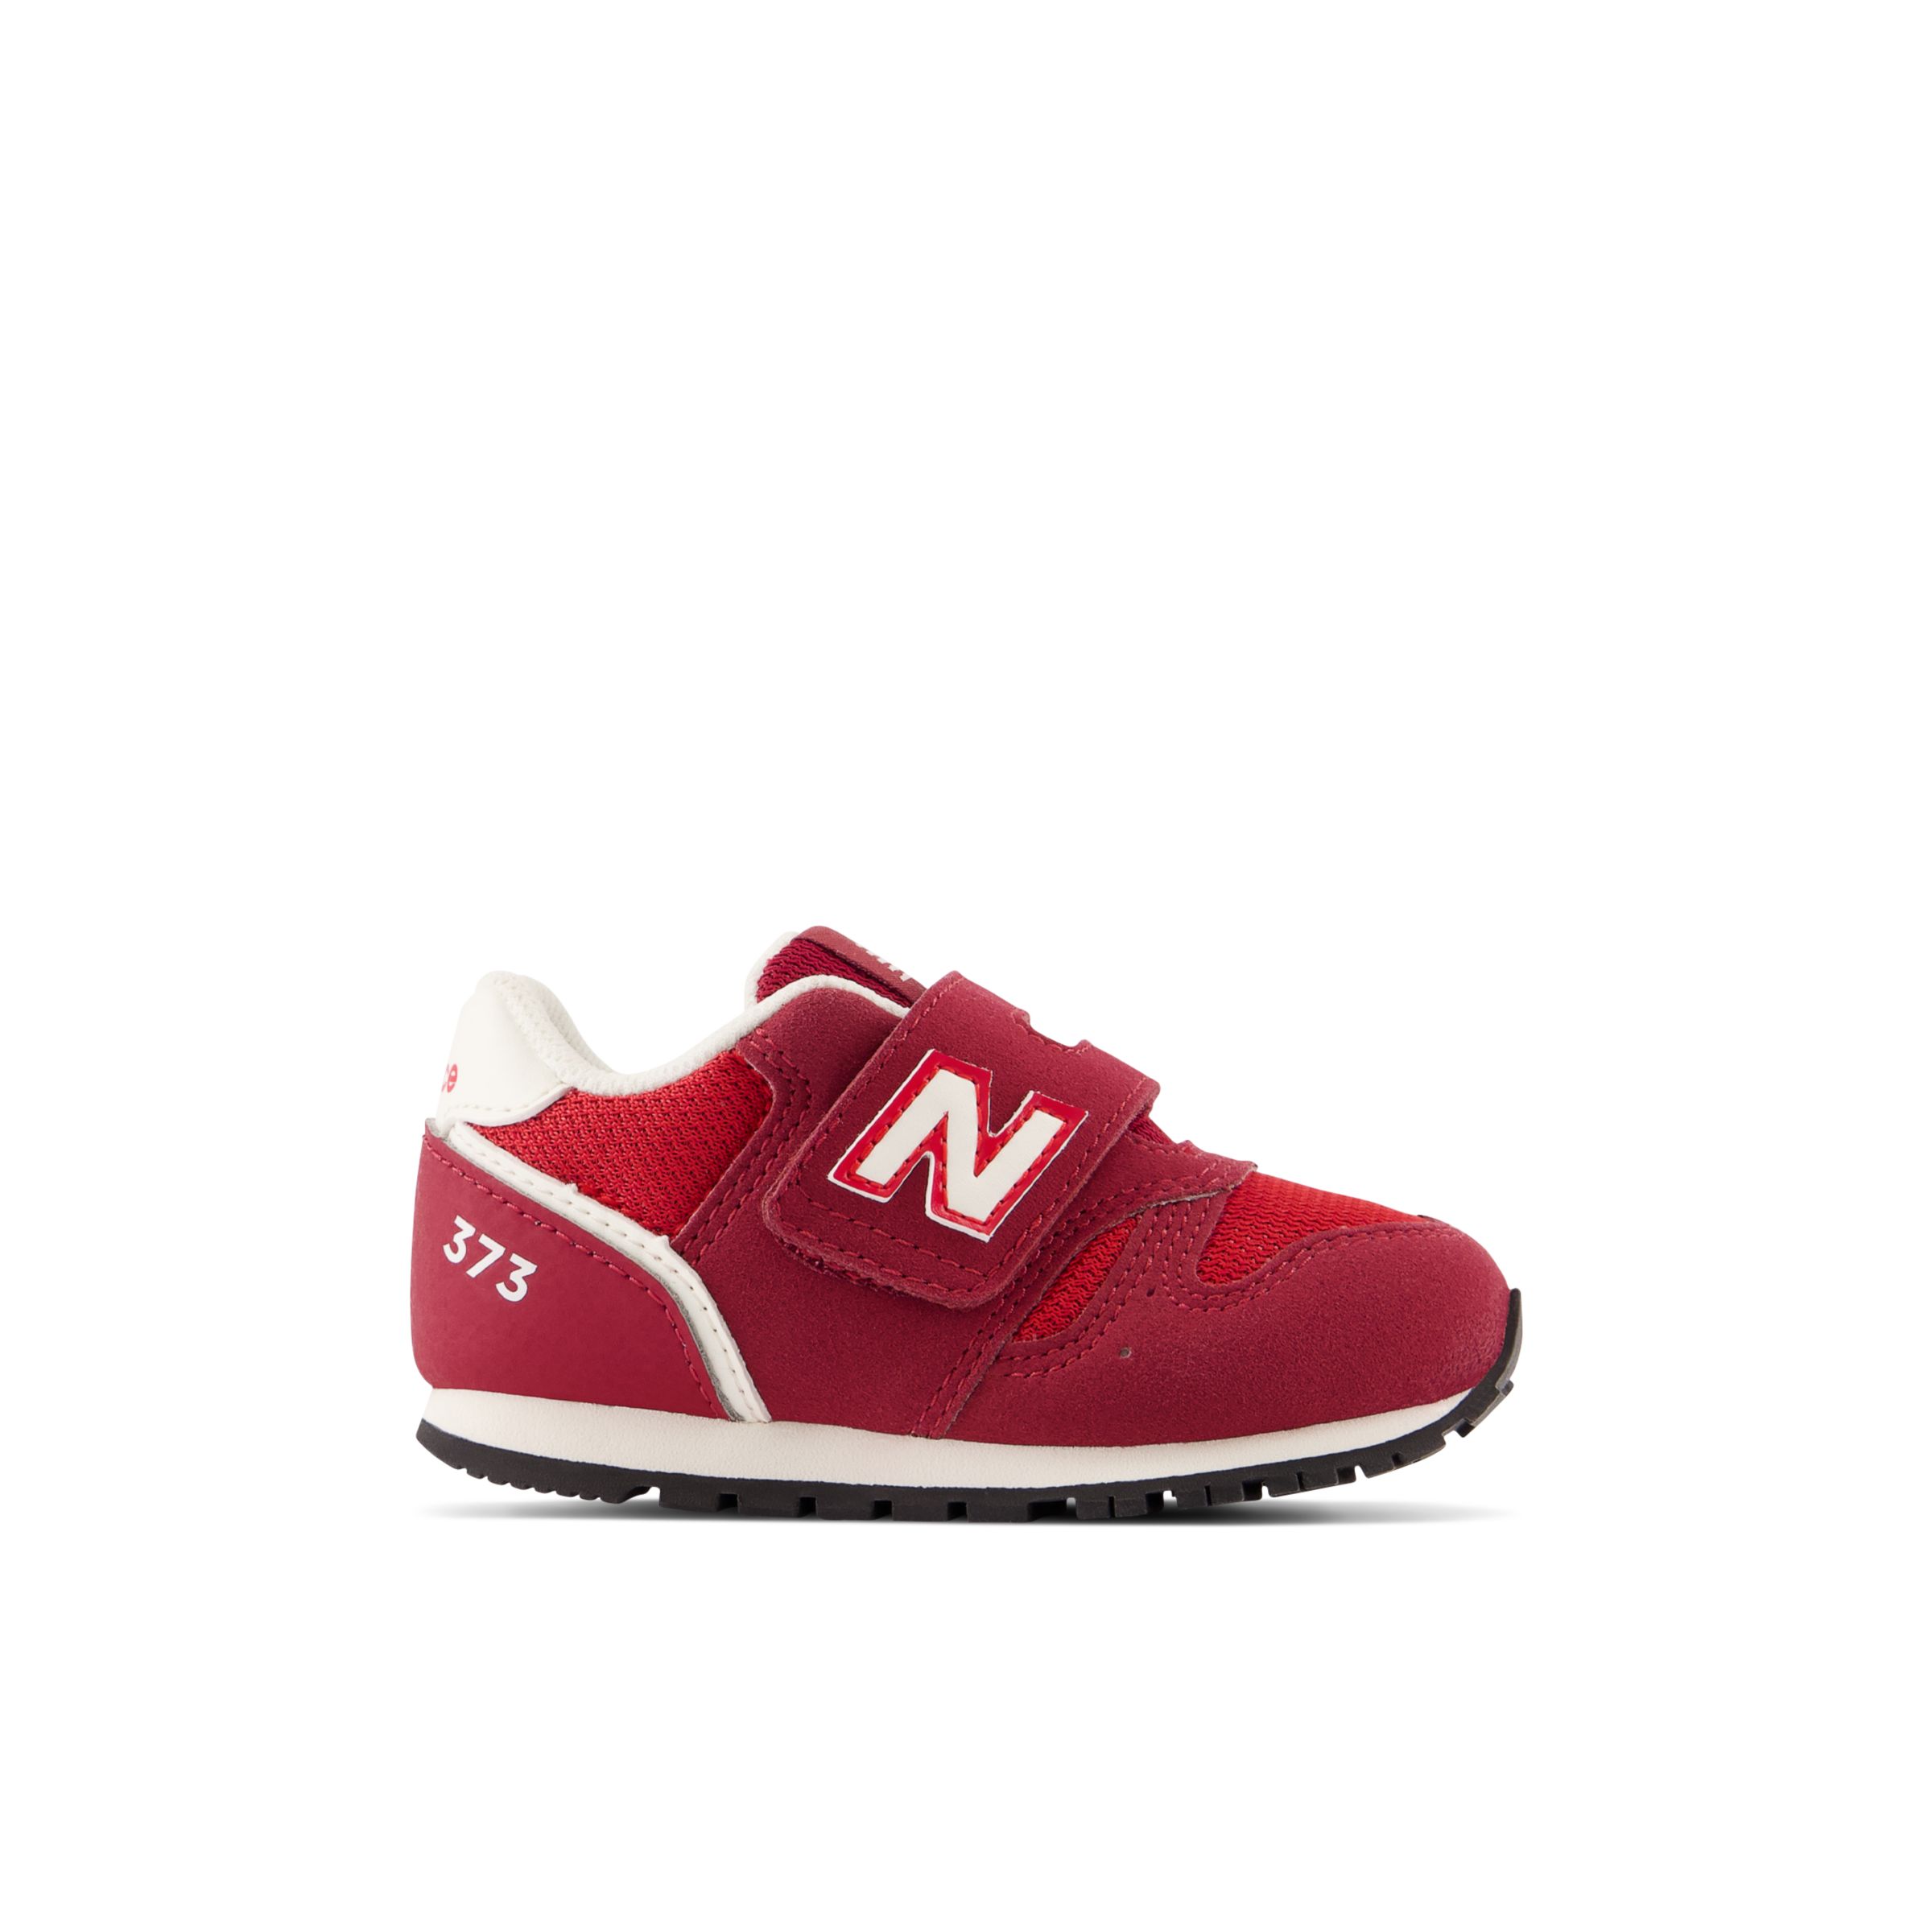 New Balance Enfant 373 Hook and Loop en Rouge, Synthetic, Taille 20.5